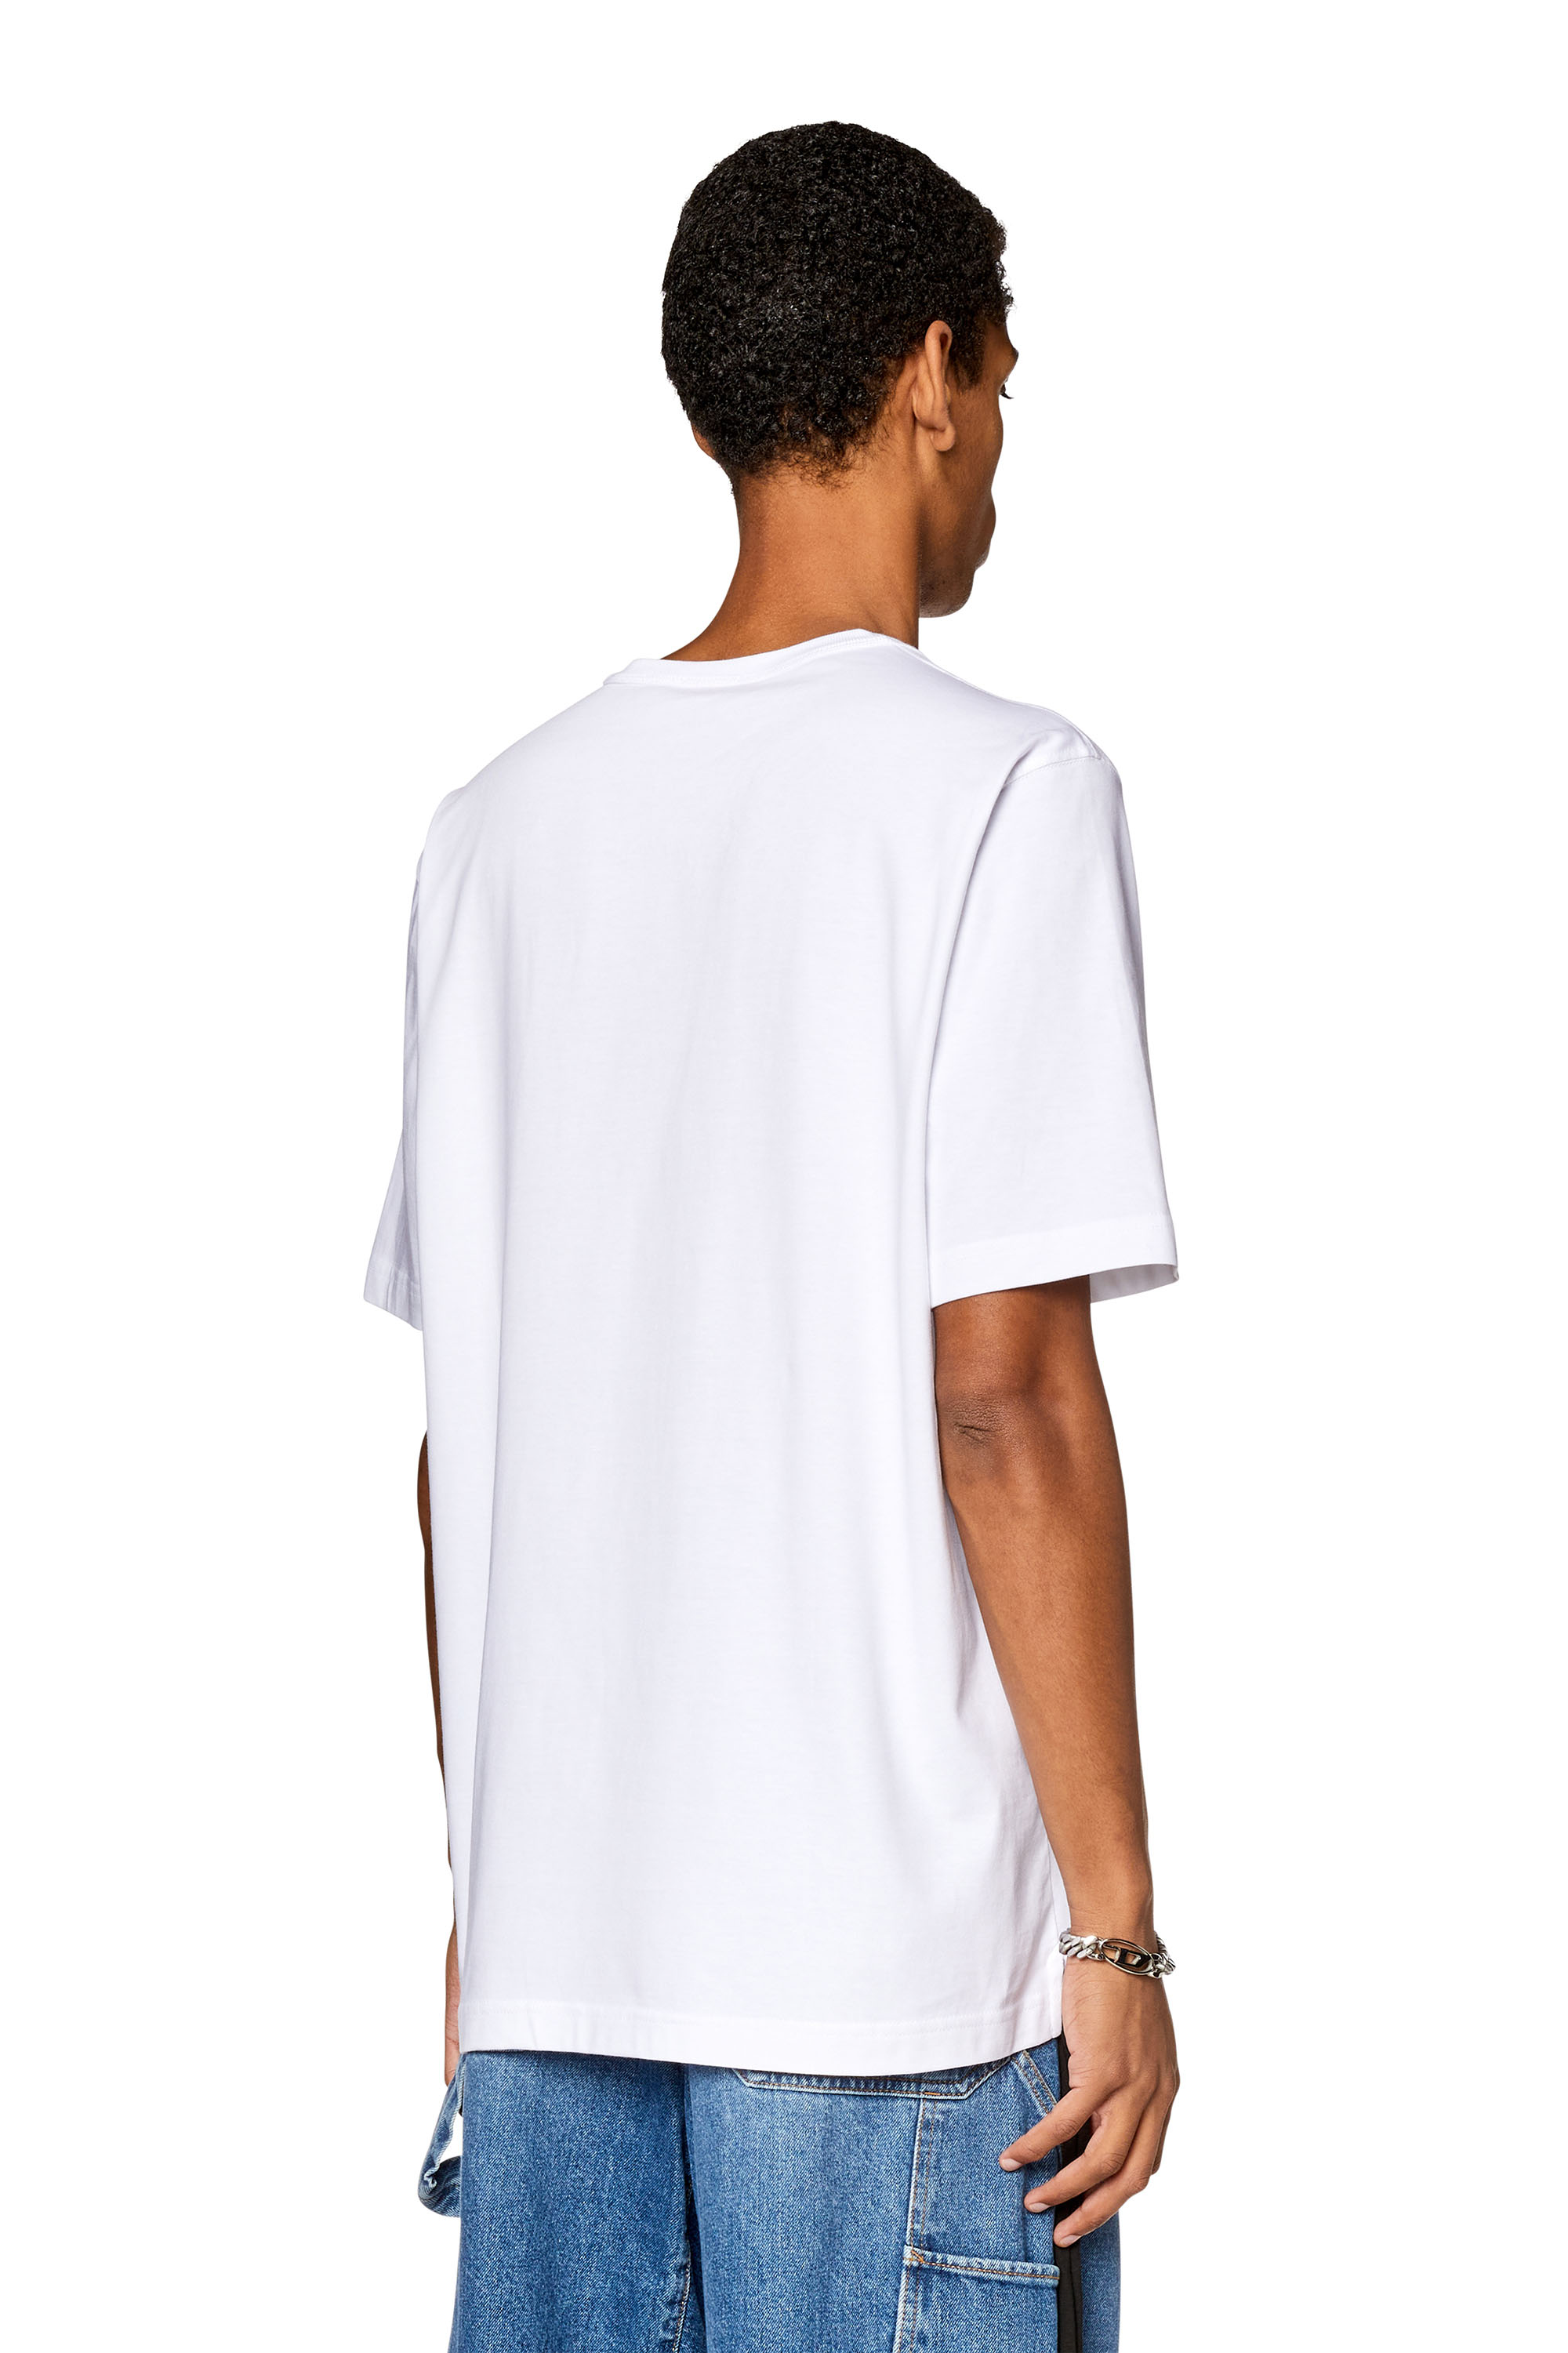 Supreme Printed, Graphic Print, Typography Men Round Neck White T-Shirt -  Buy Supreme Printed, Graphic Print, Typography Men Round Neck White T-Shirt  Online at Best Prices in India